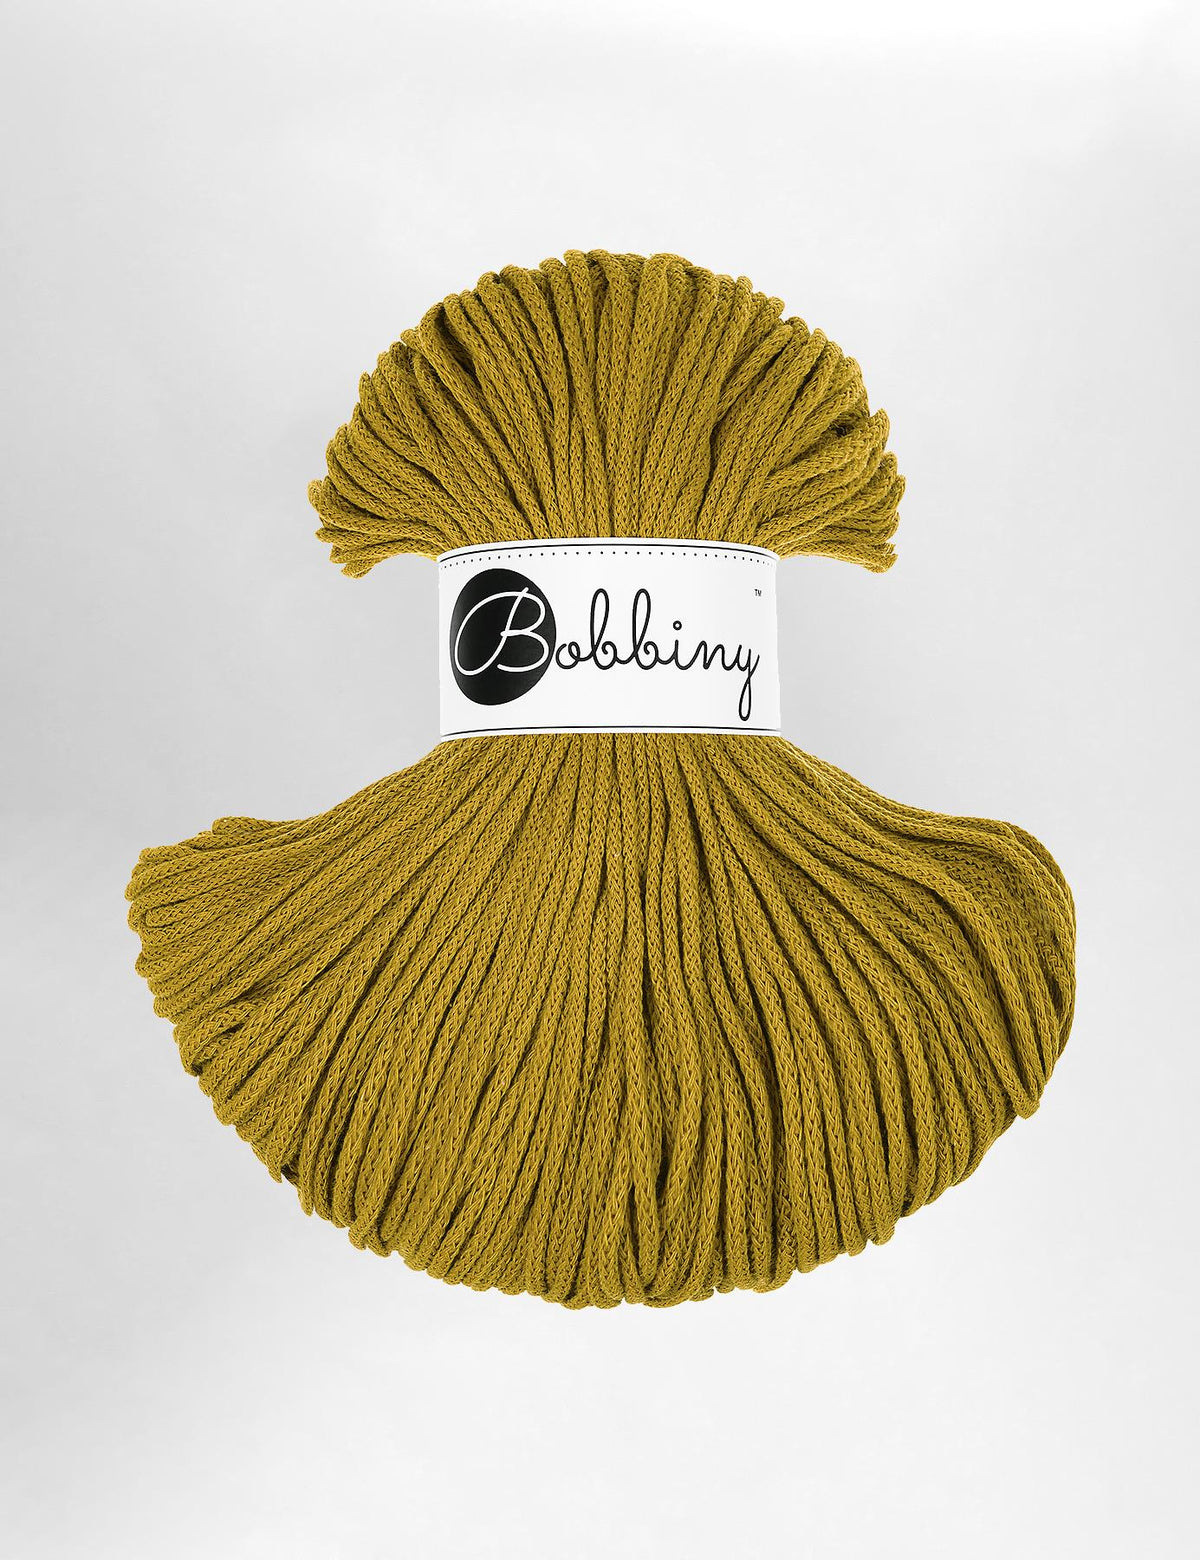 3mm Spicy Yellow recycled cotton macrame cord by Bobbiny (100m)